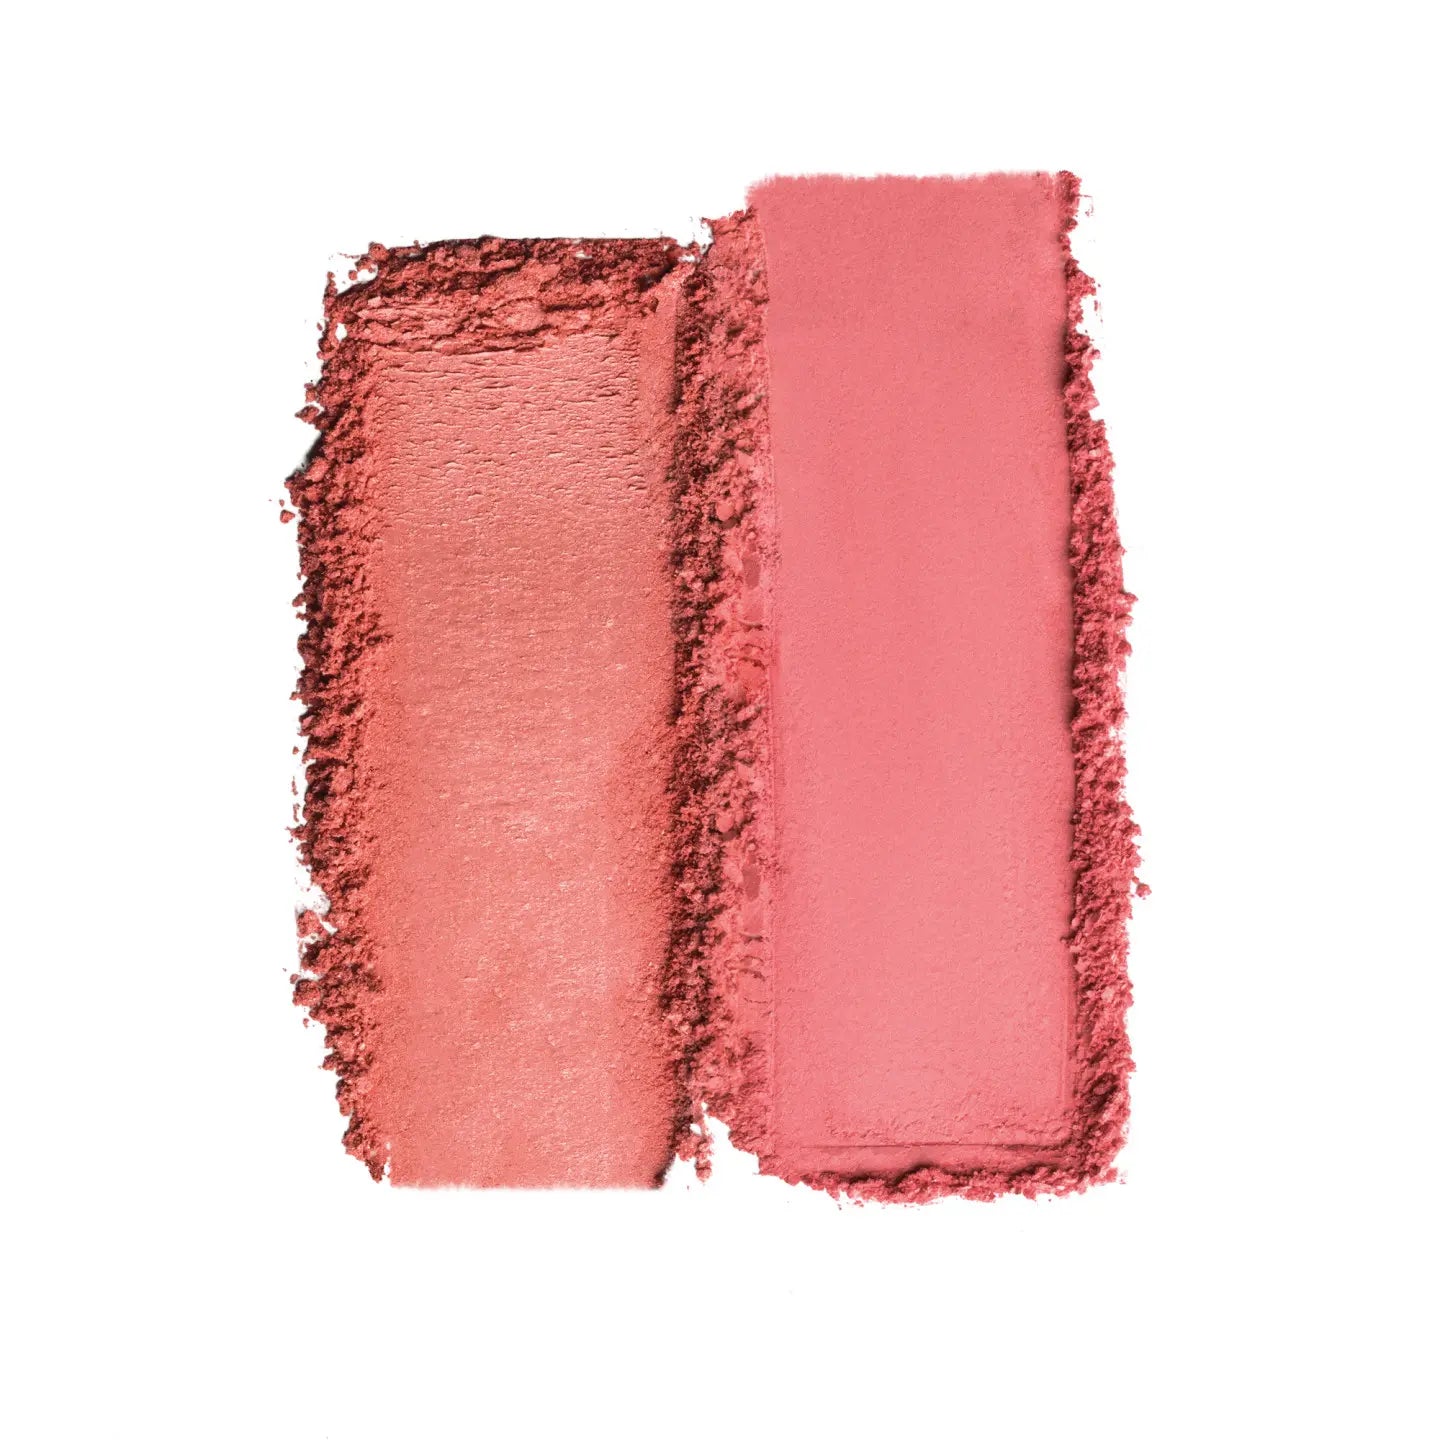 Selected: FEELIN' CHEEKY LASTING LOVE Clean Amplifying Blush Duo